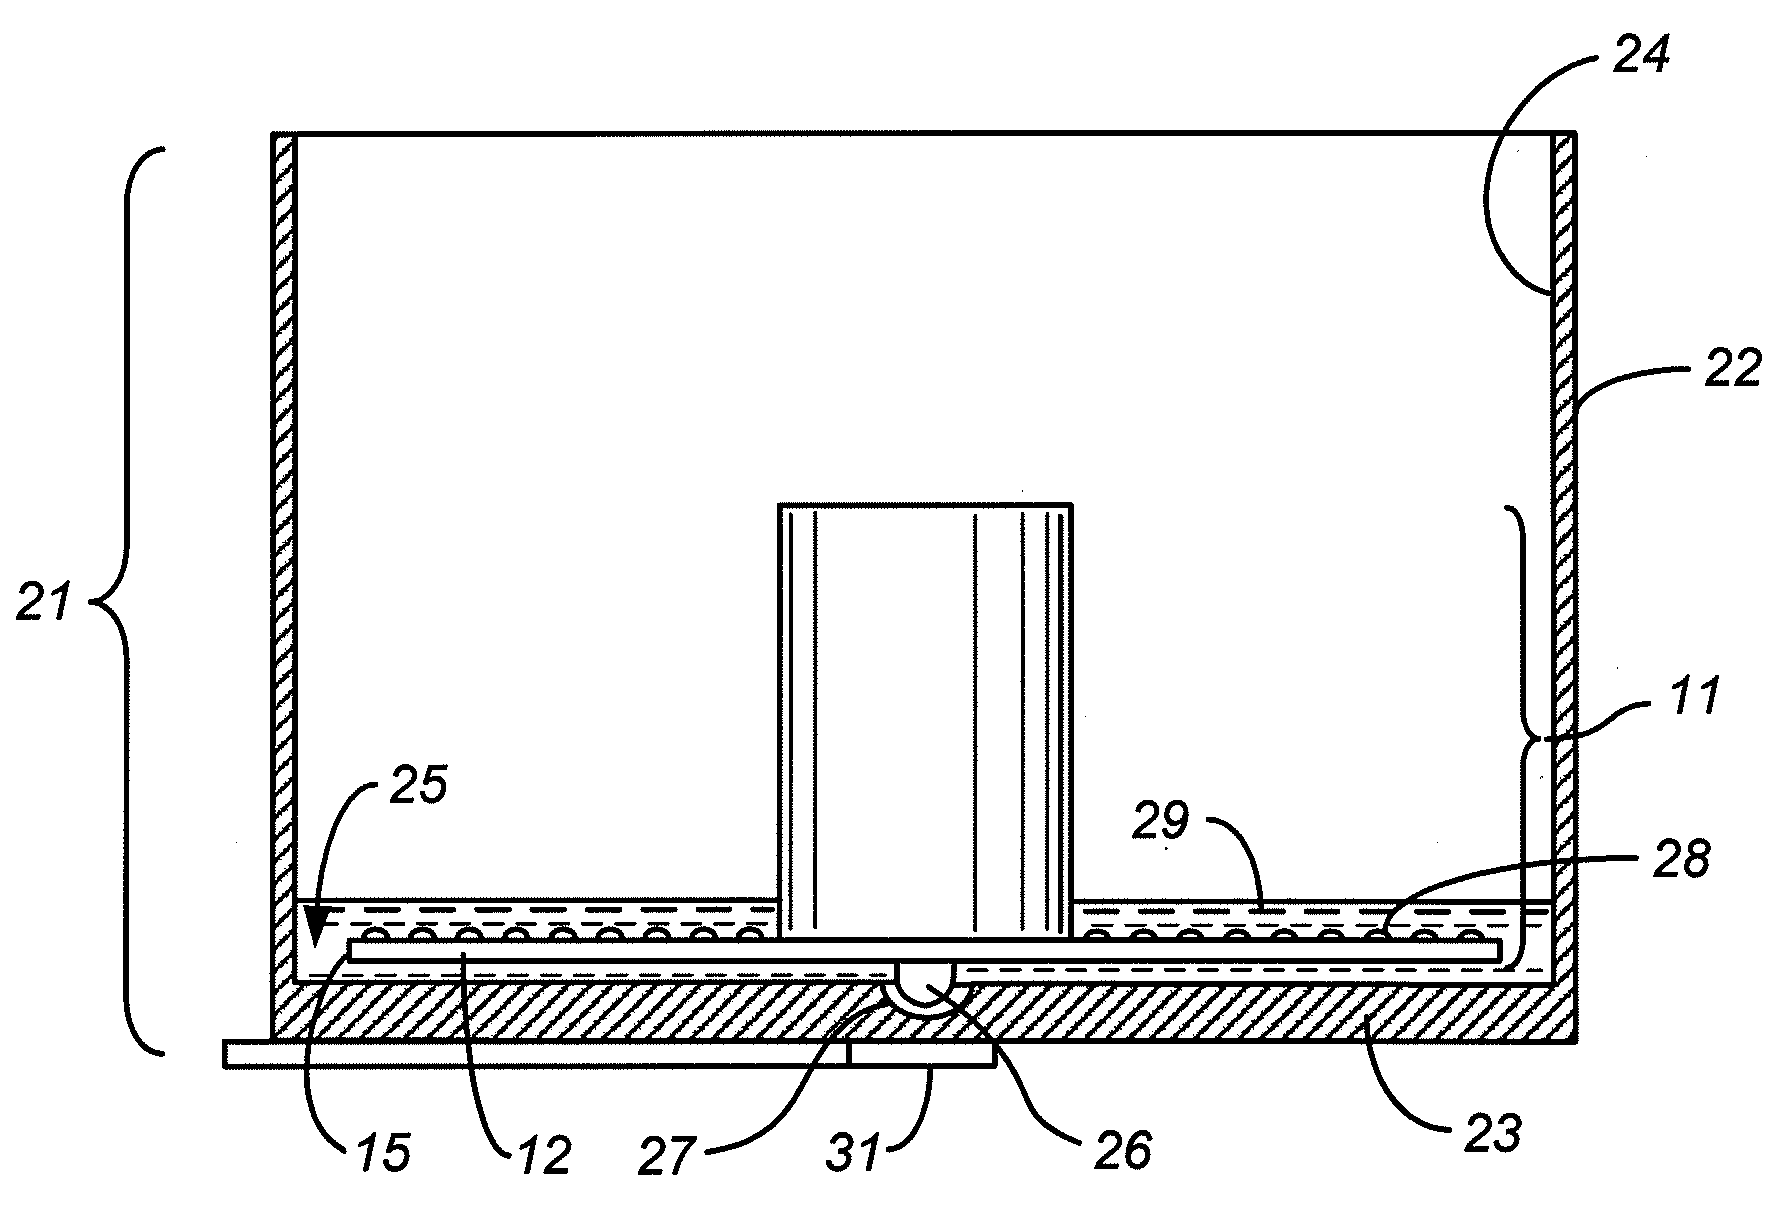 Use of disk surface for electroporation of adherent cells